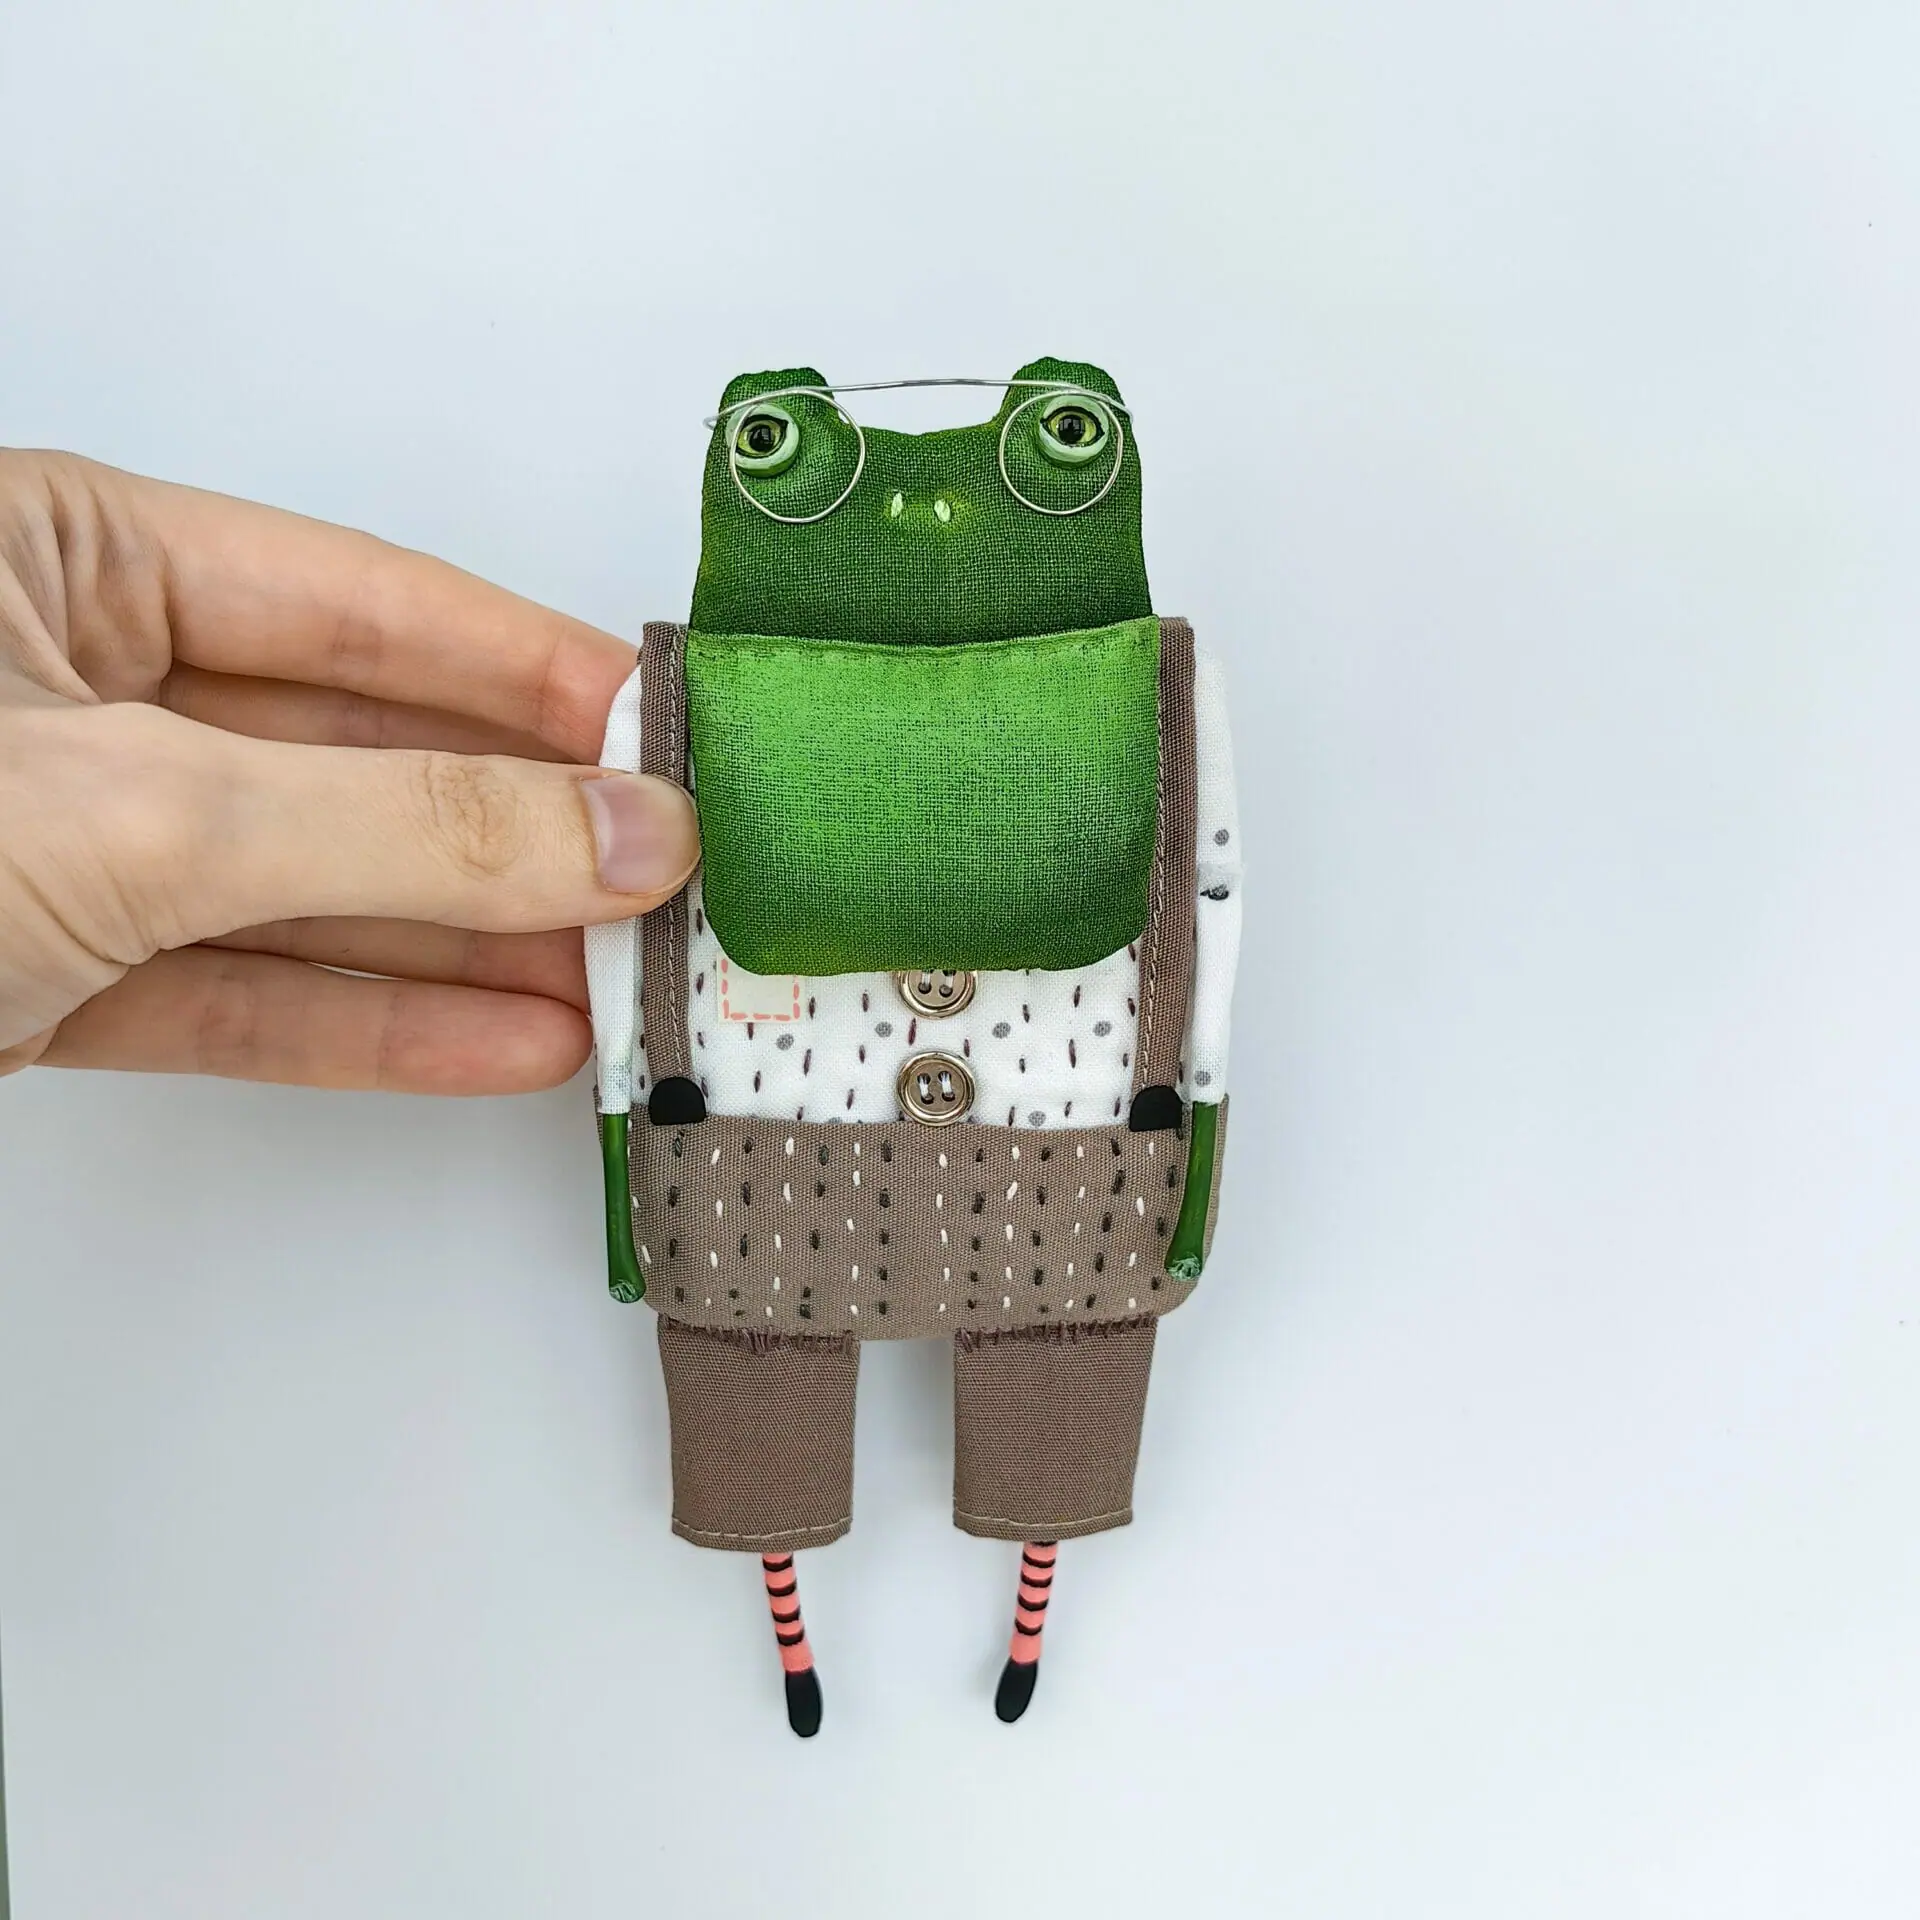 https://s3.eu-central-1.wasabisys.com/dailydoll.shop/wp-content/uploads/2023/08/27200448/one-of-a-kind-textile-art-doll-frog-boy-in-gray-pants.jpg.webp